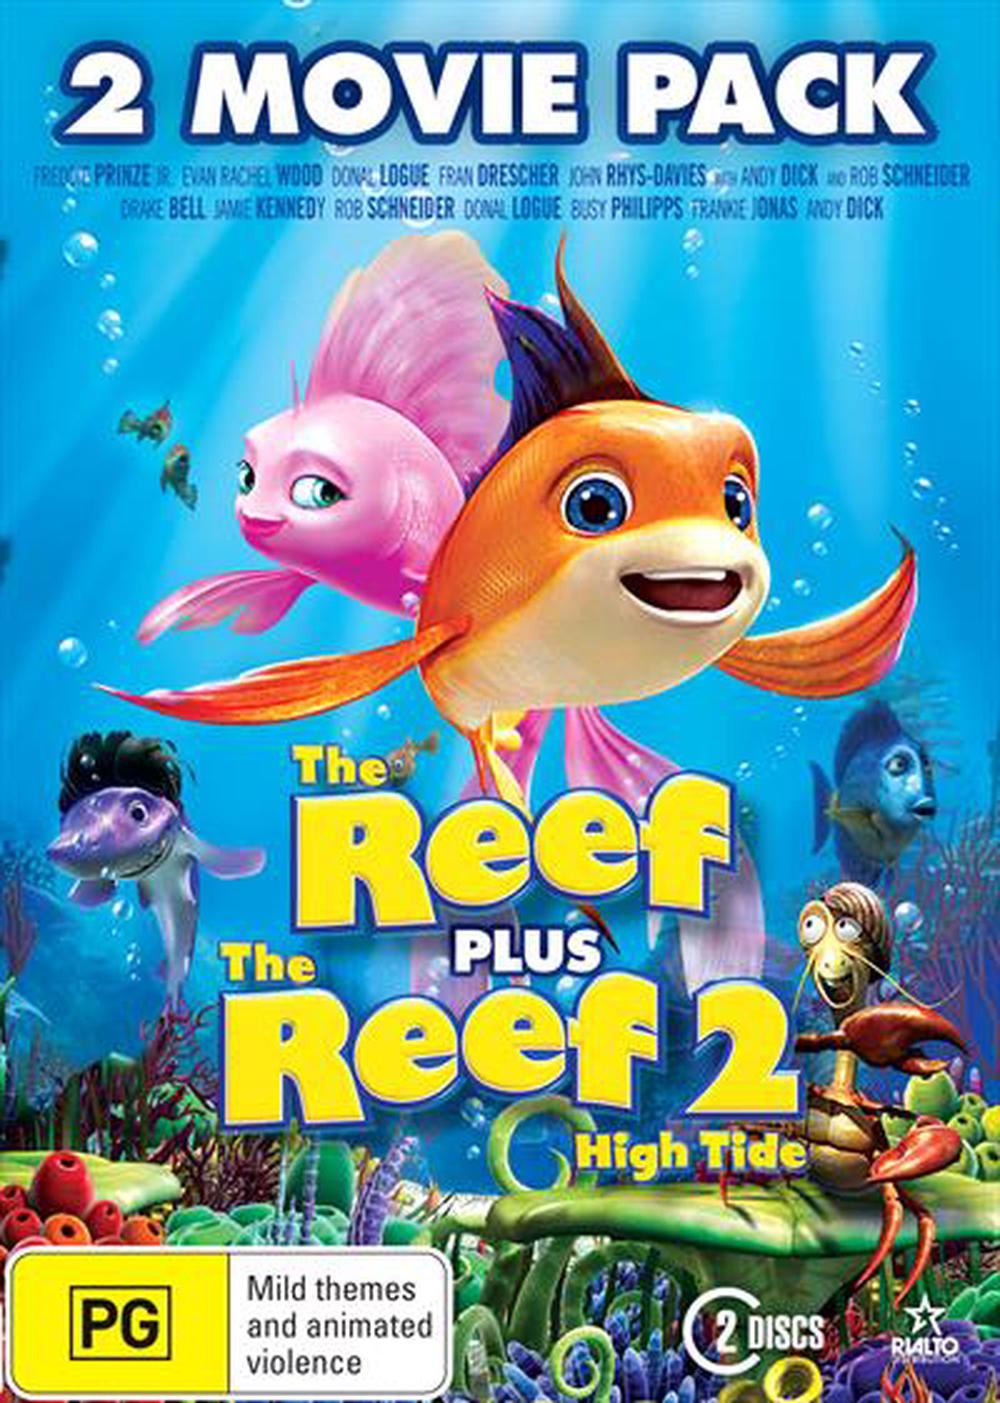 26 HQ Photos The Reef Movie Animated - The Reef 2 High Tide Full Movie